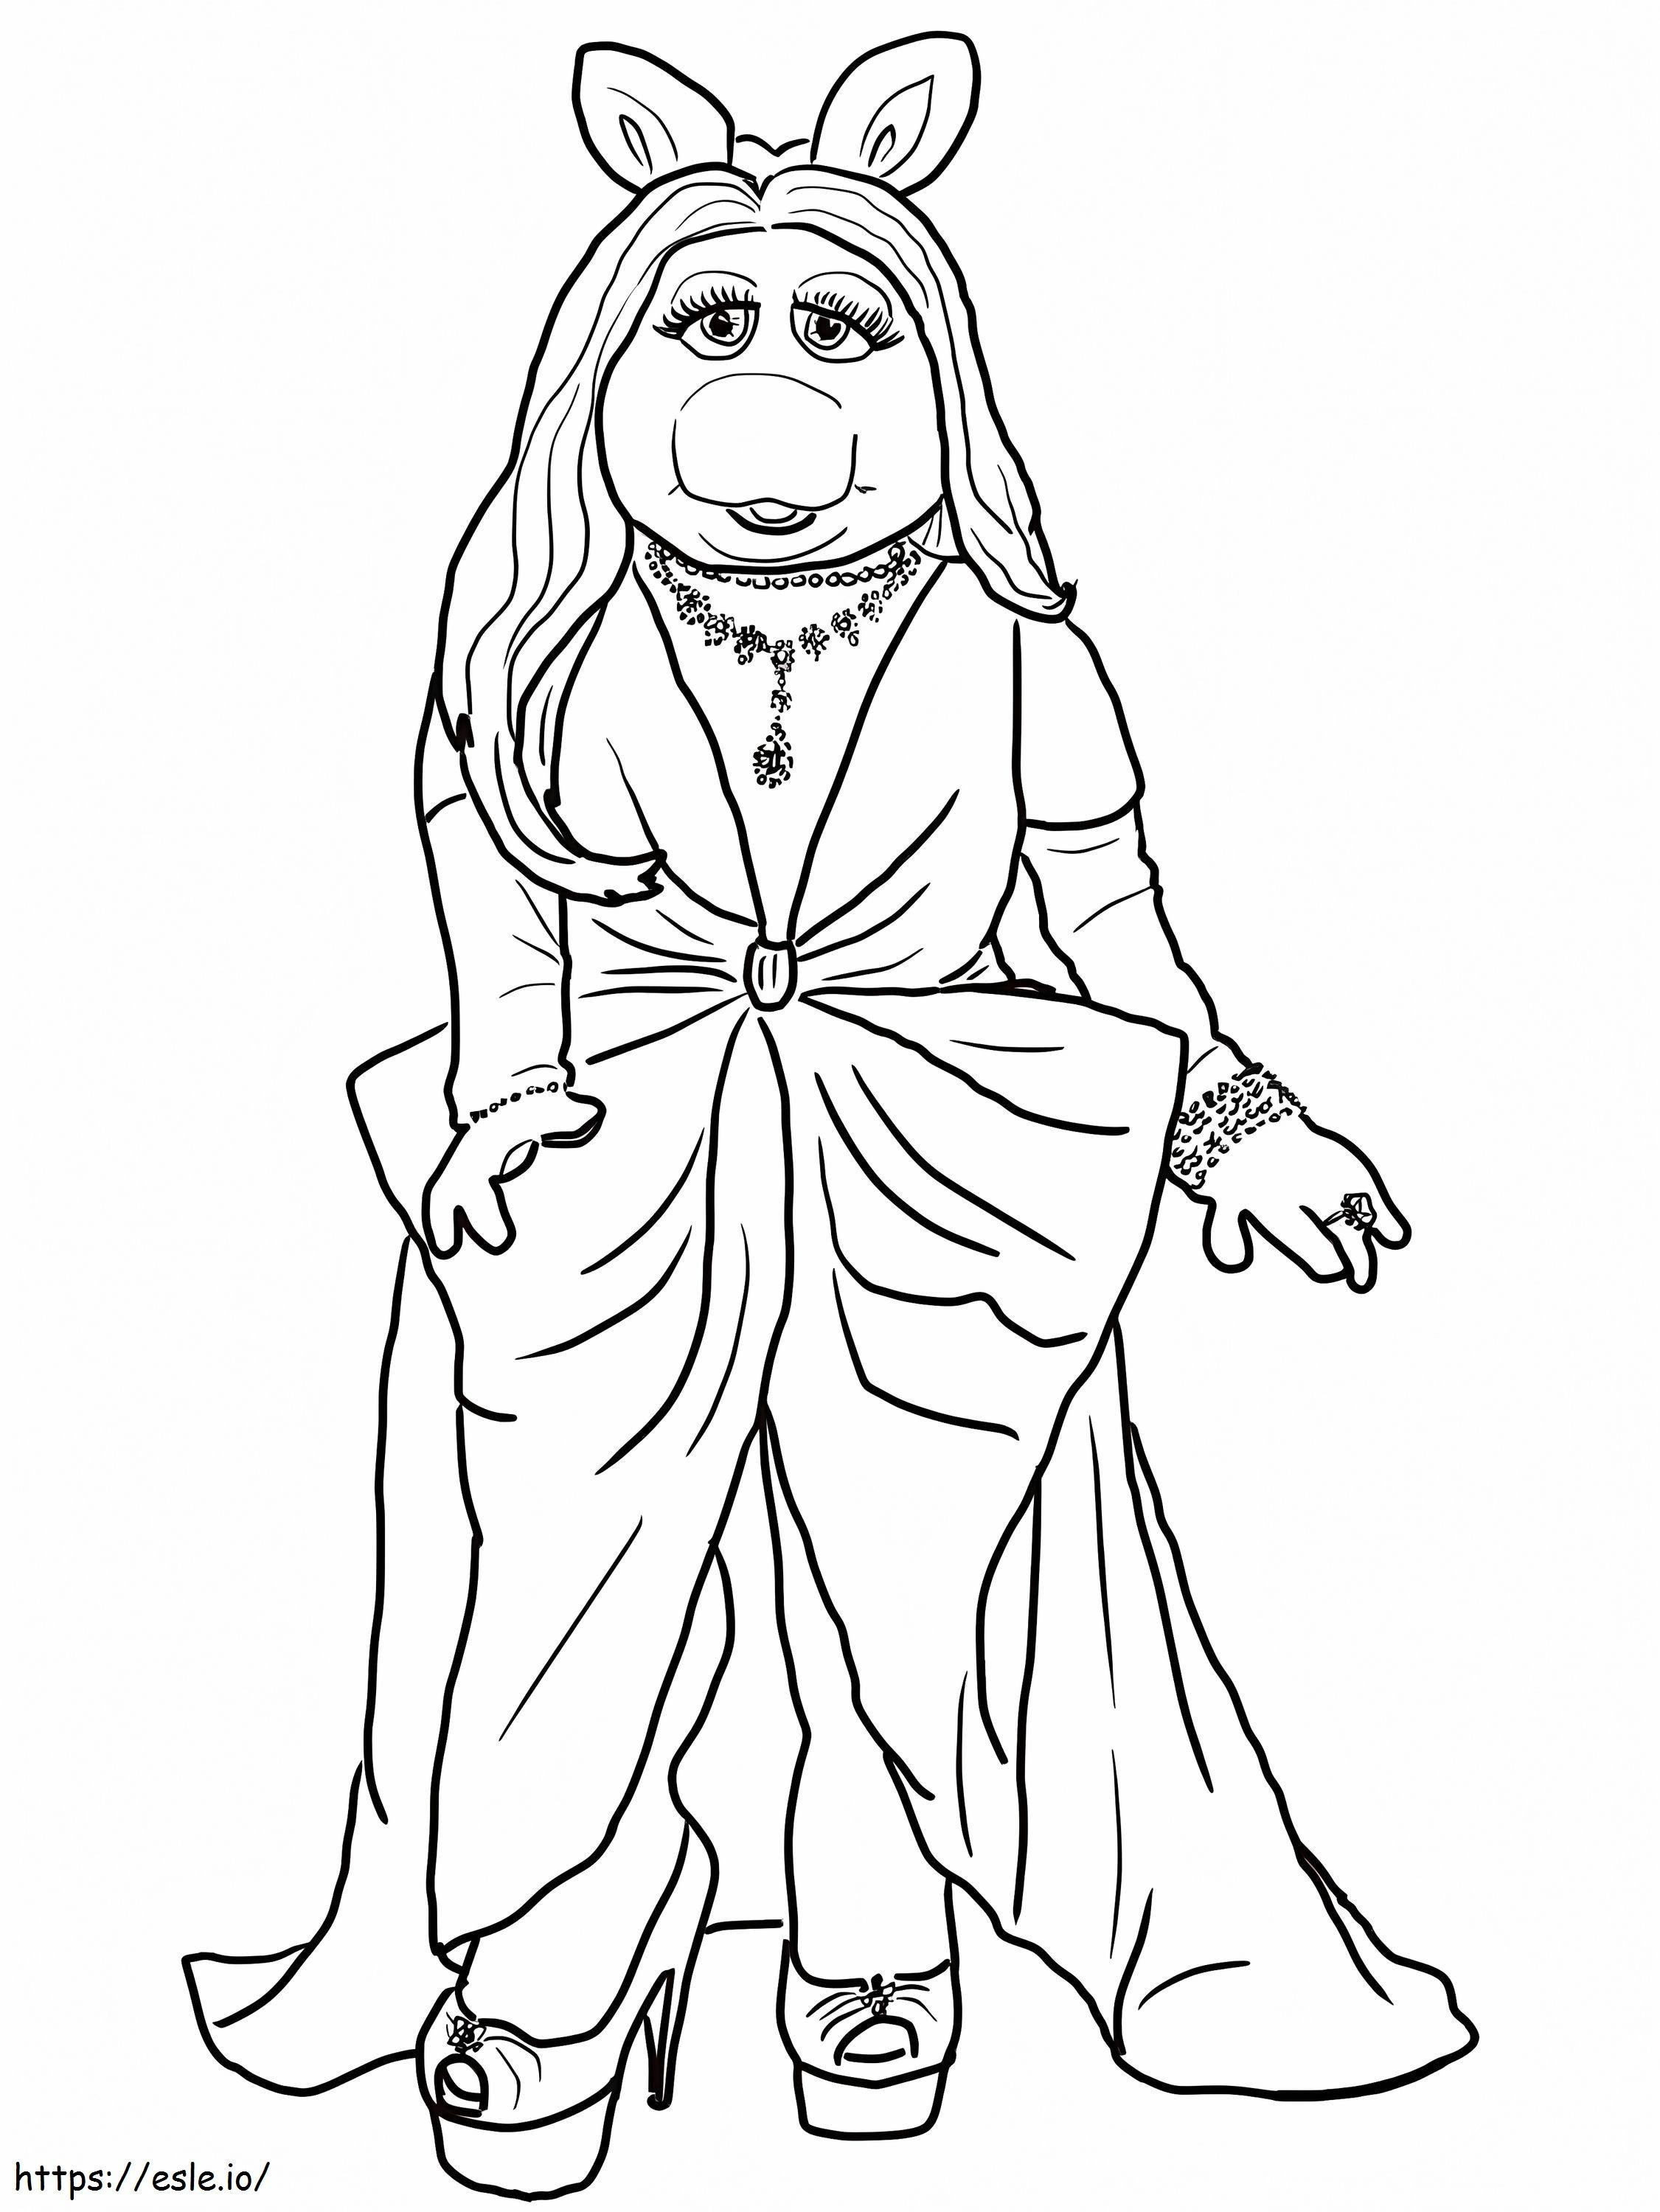 Miss Piggy coloring page